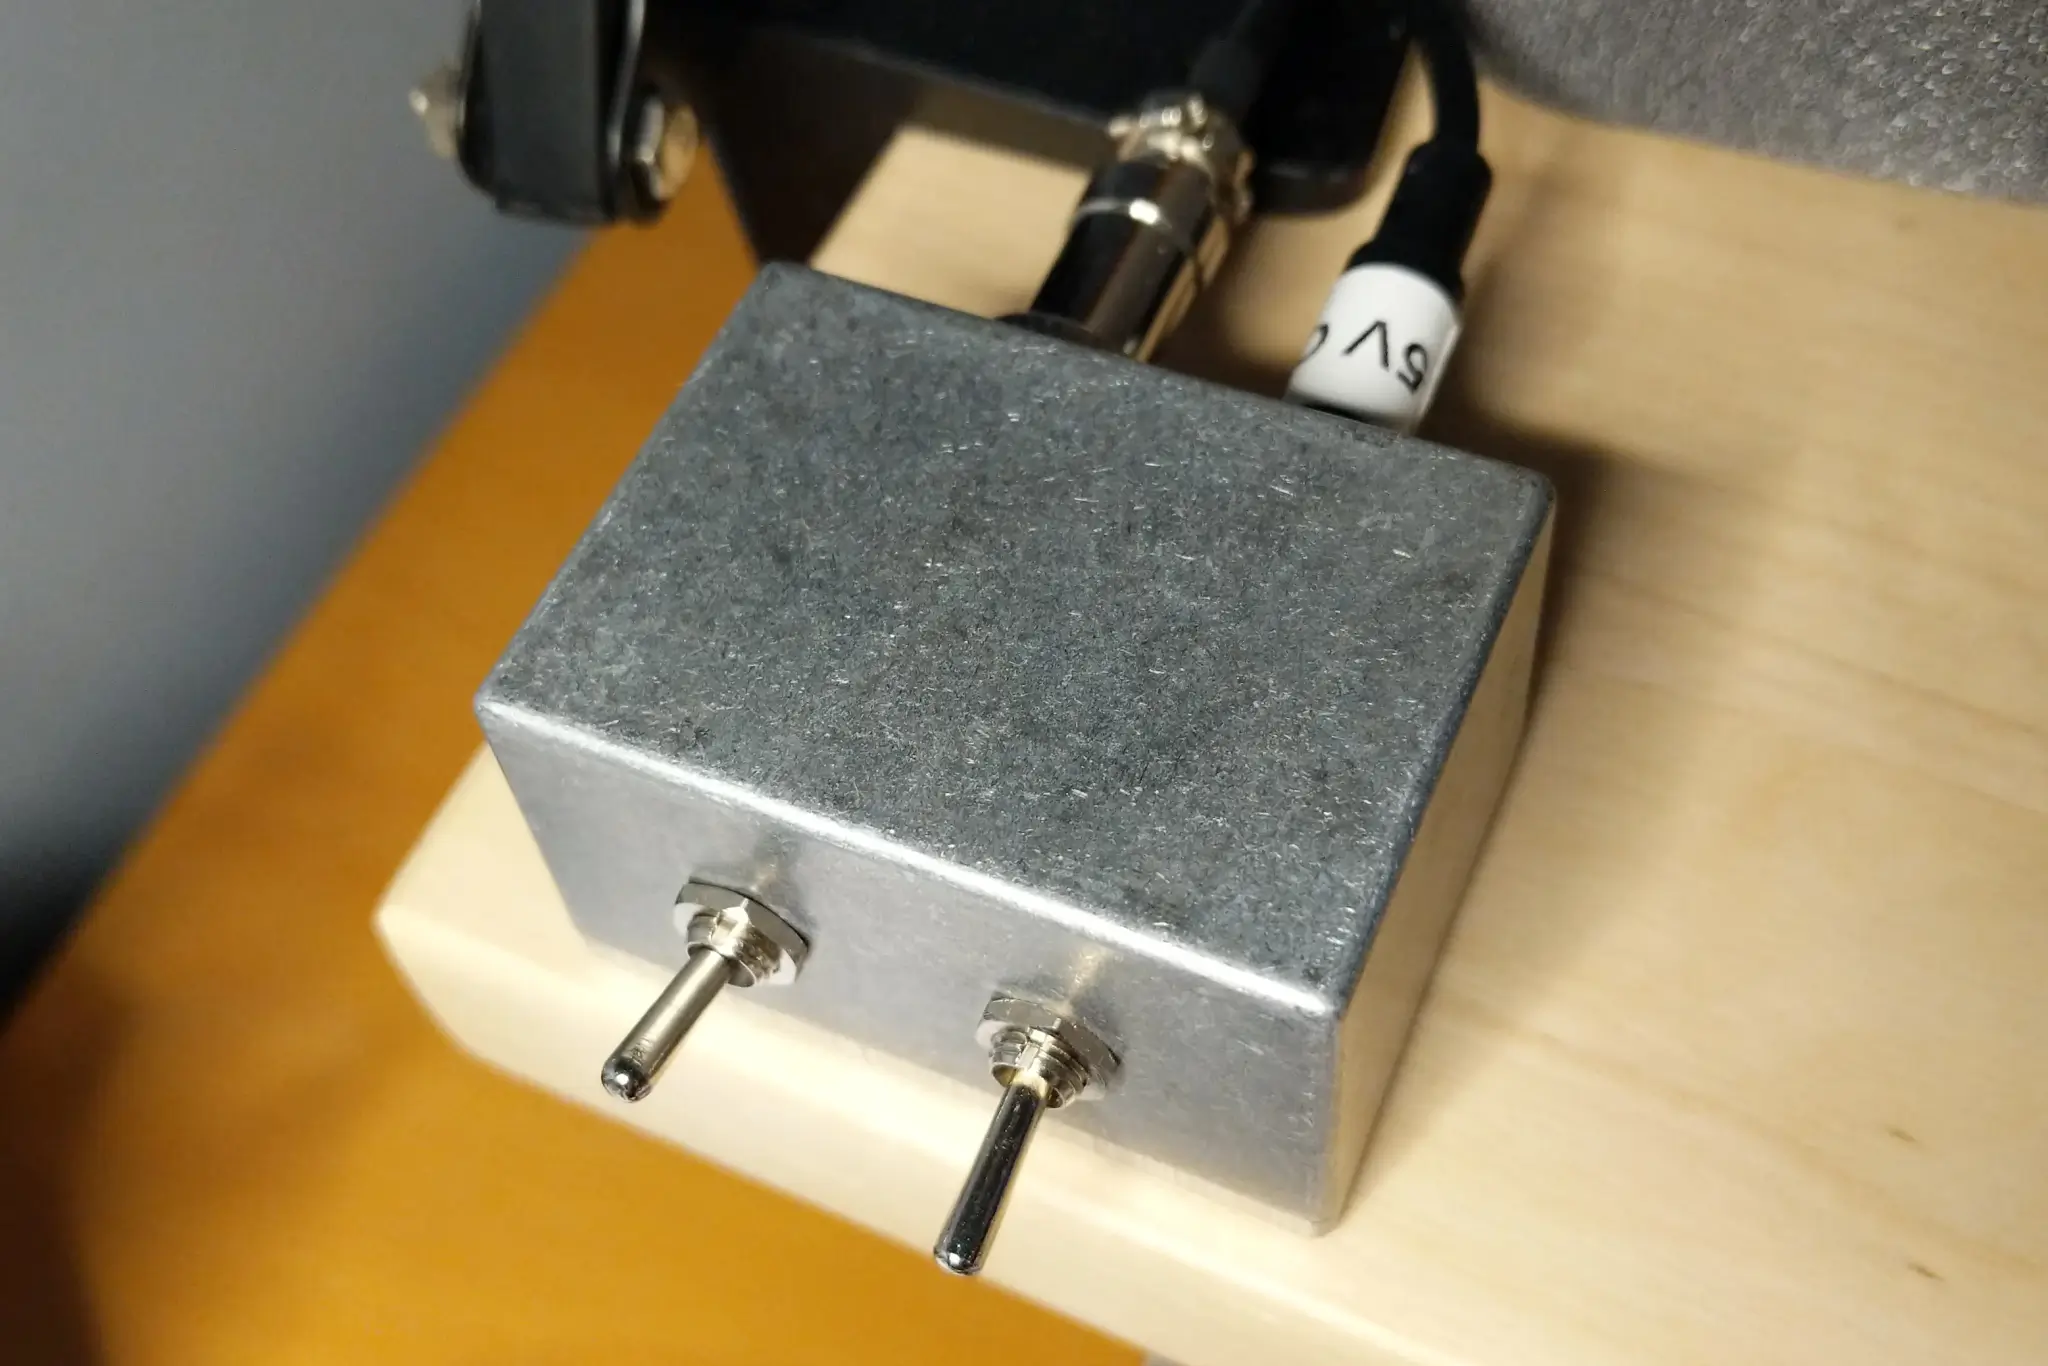 A small aluminium box, about 5 cm across, with two metal toggle switches
on the front and two cables connected at the rear.